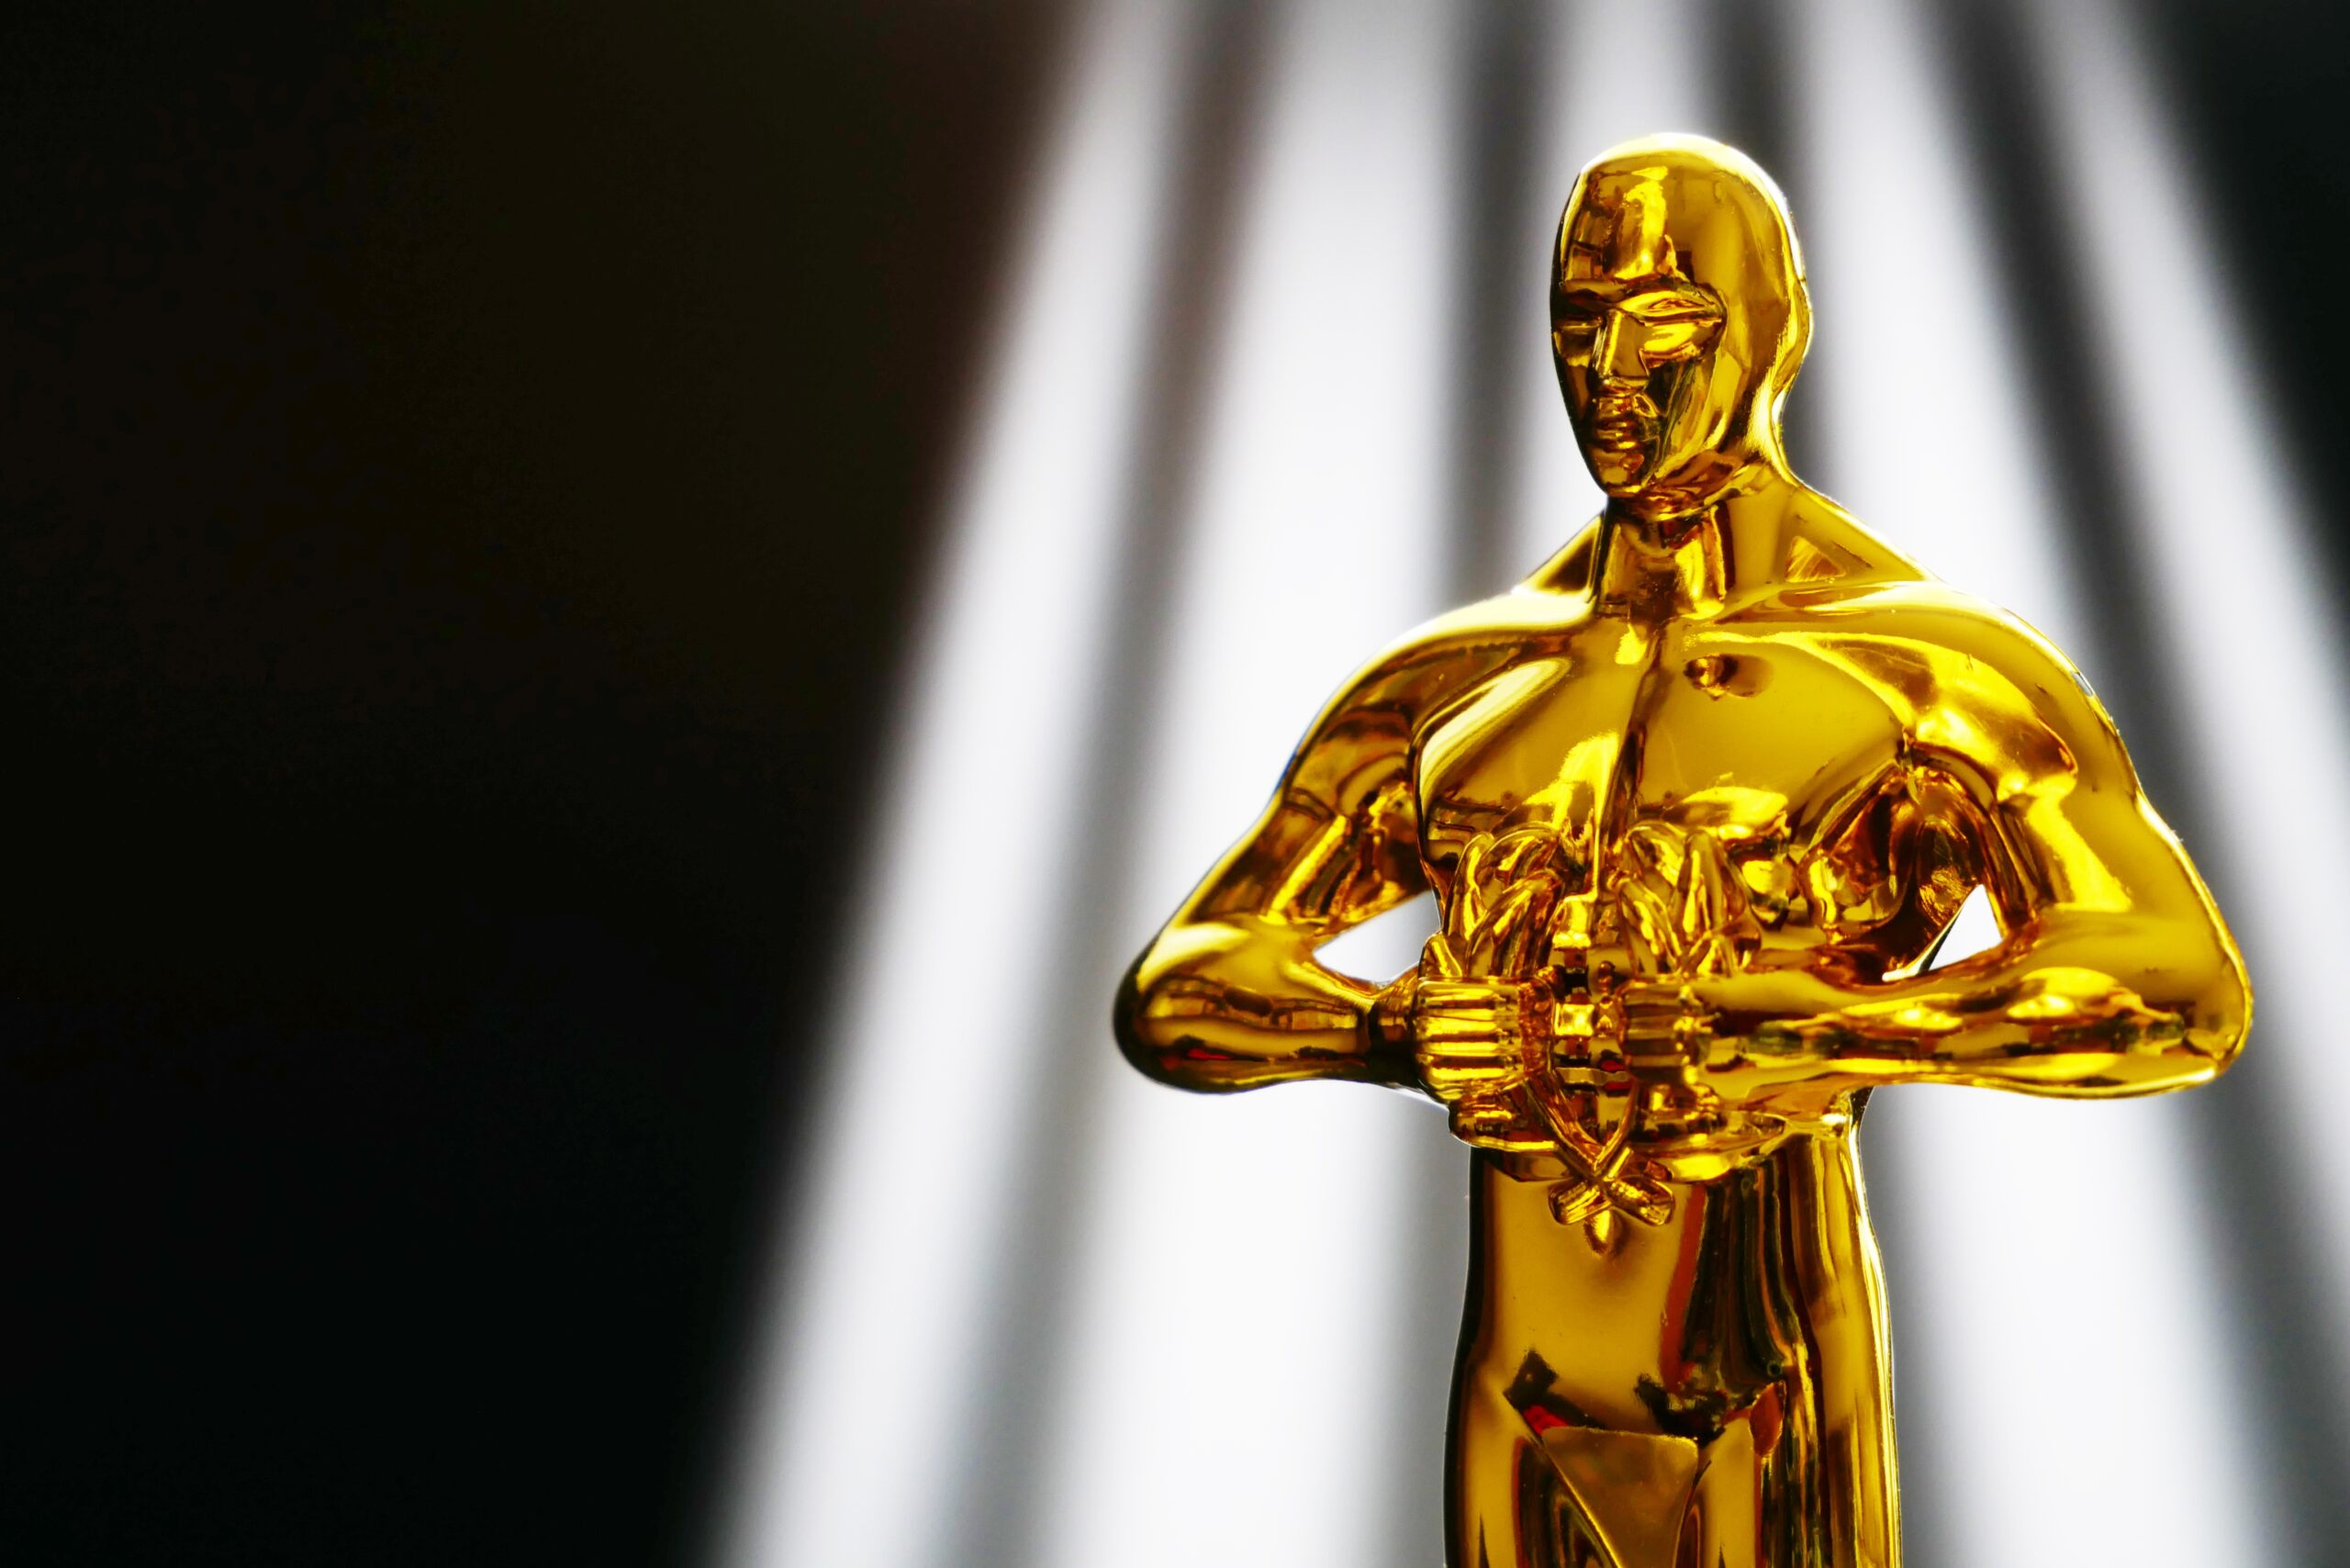 Geek insider, geekinsider, geekinsider. Com,, $100 gets you $10,000 if cocaine bear wins the academy award for best picture in march 2024, entertainment